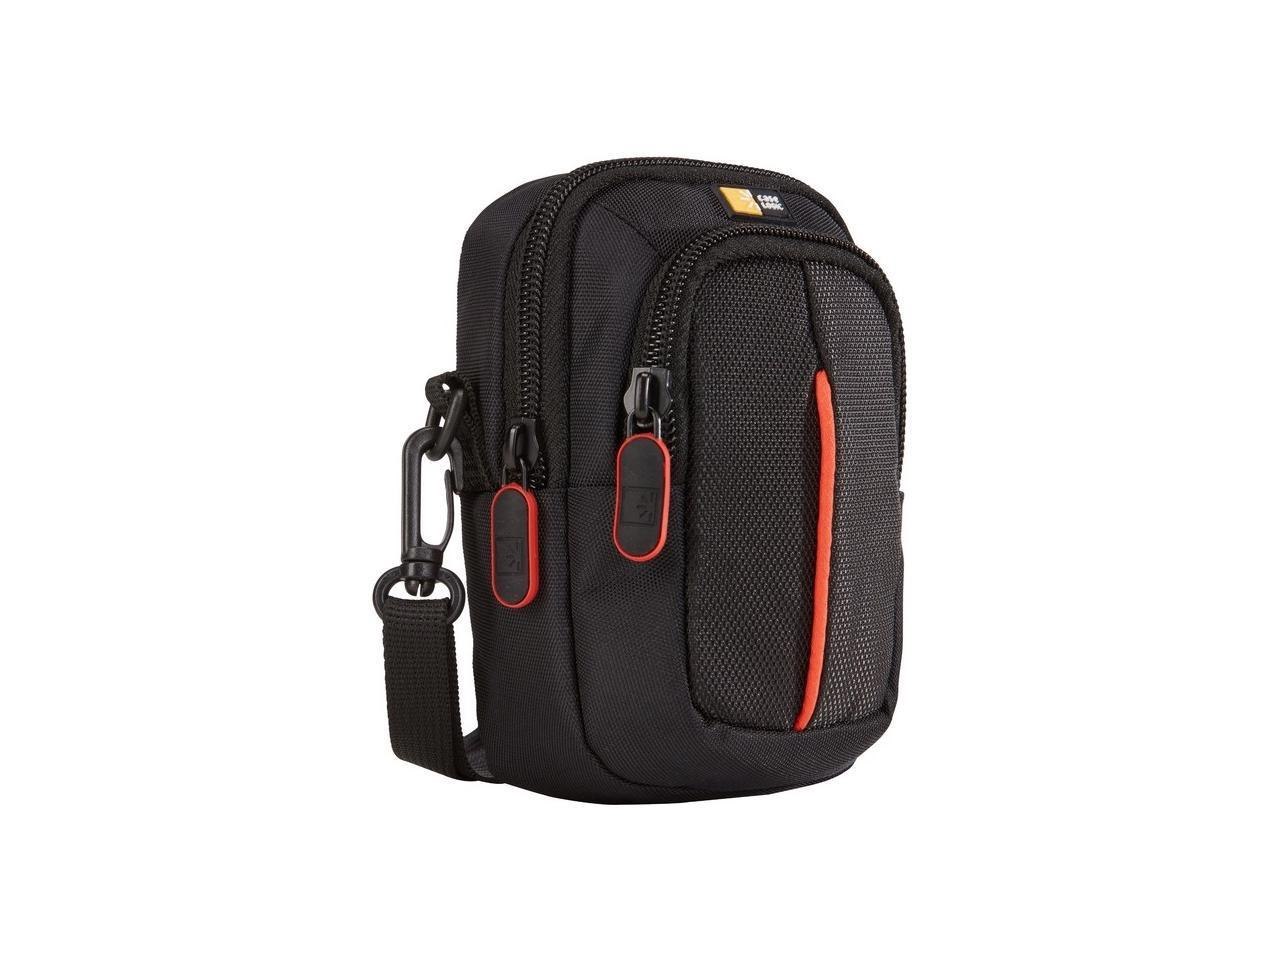 Case Logic Advance DCB-313 Carrying Case Camera, Memory Card, Accessories - Black